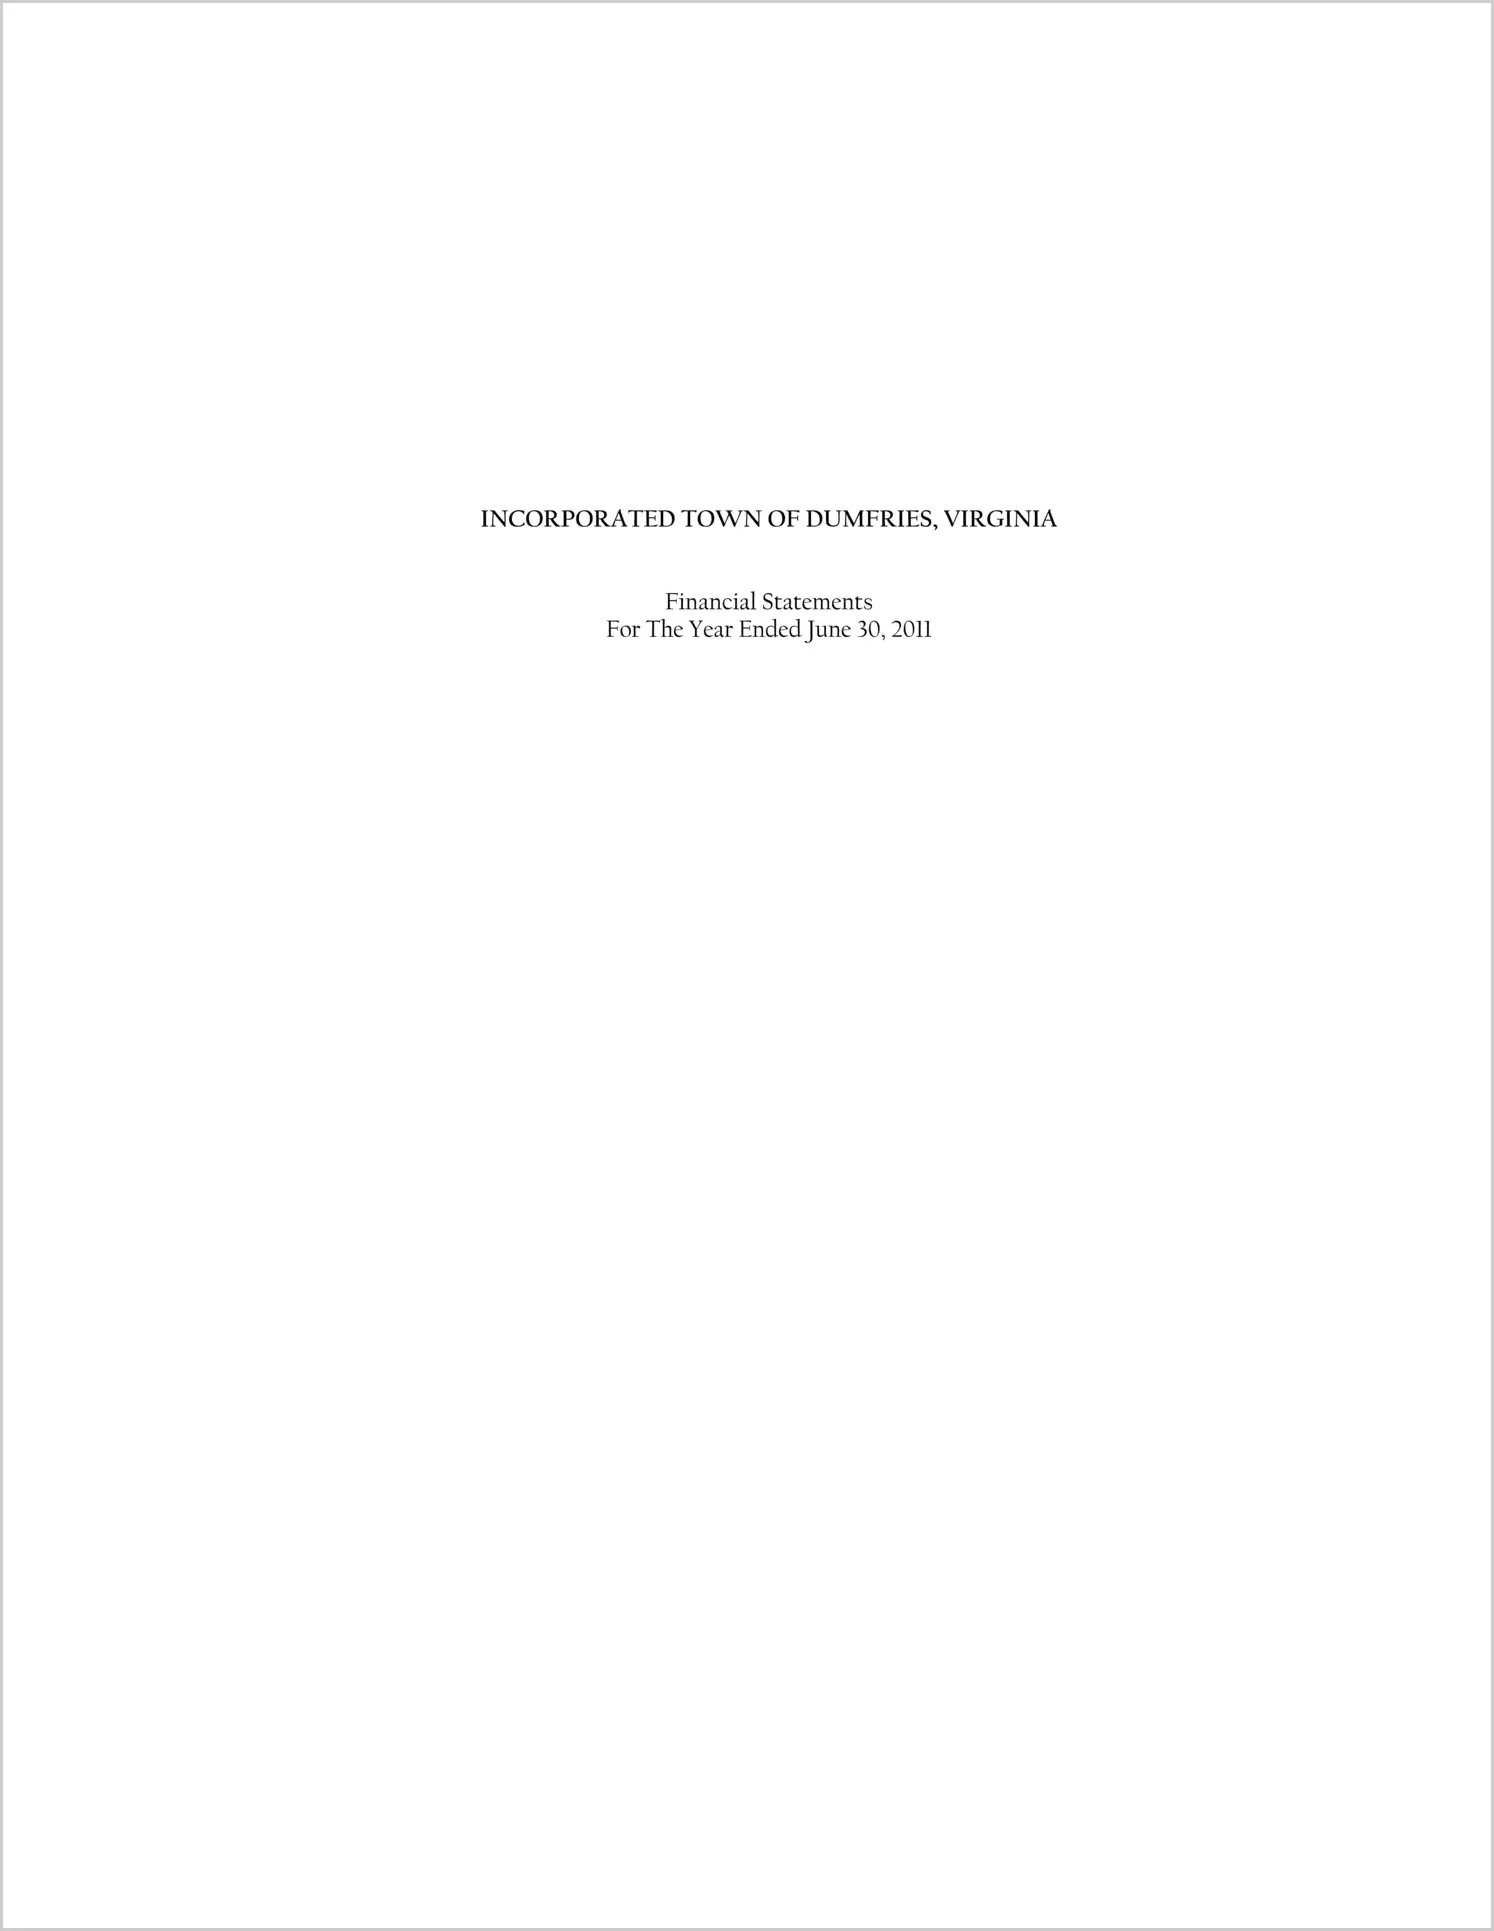 2011 Annual Financial Report for Town of Dumfries